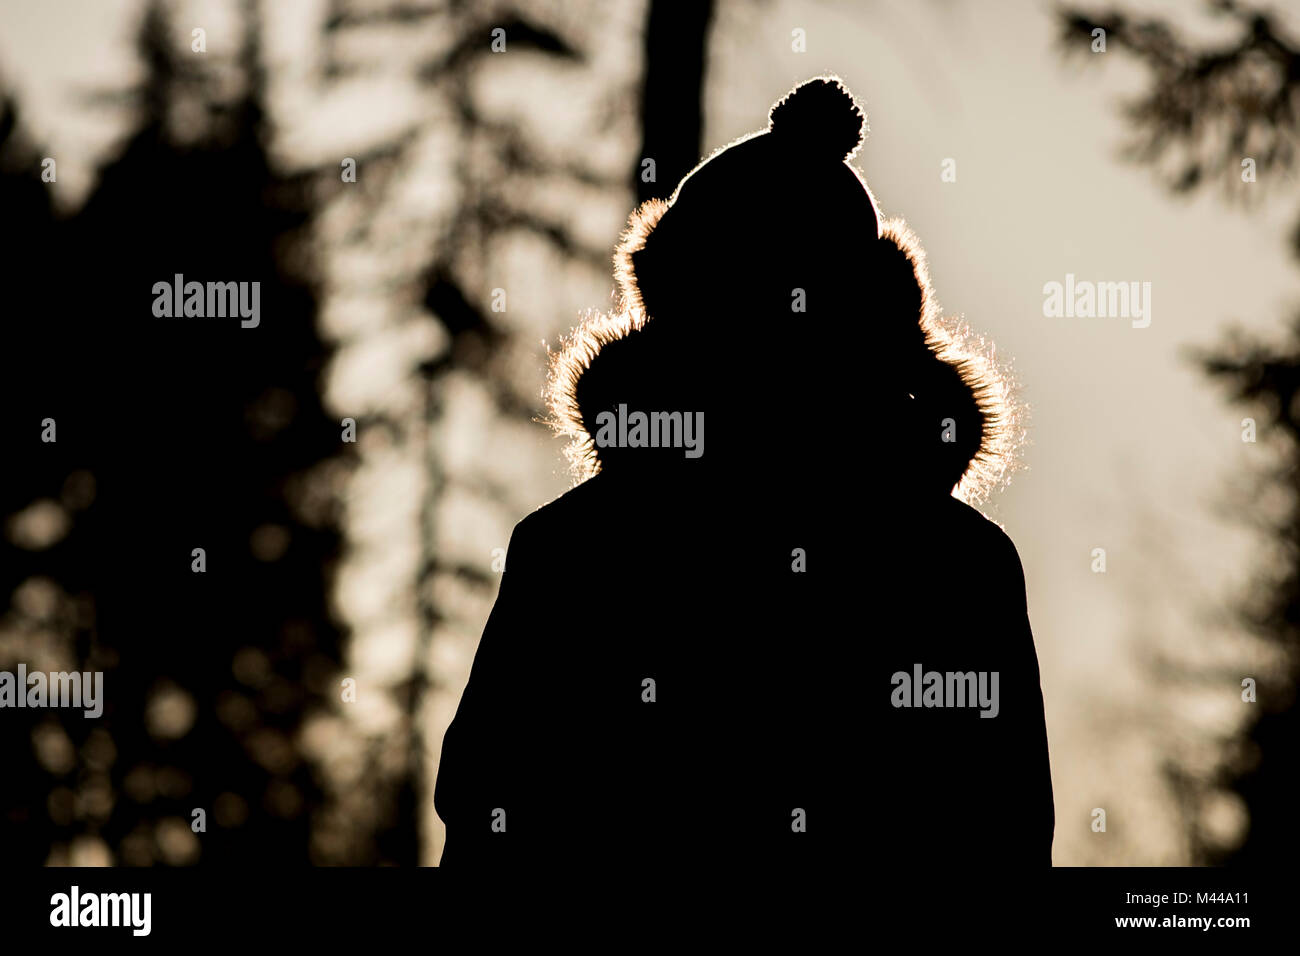 Silhouette of woman in winter coat and hat Stock Photo